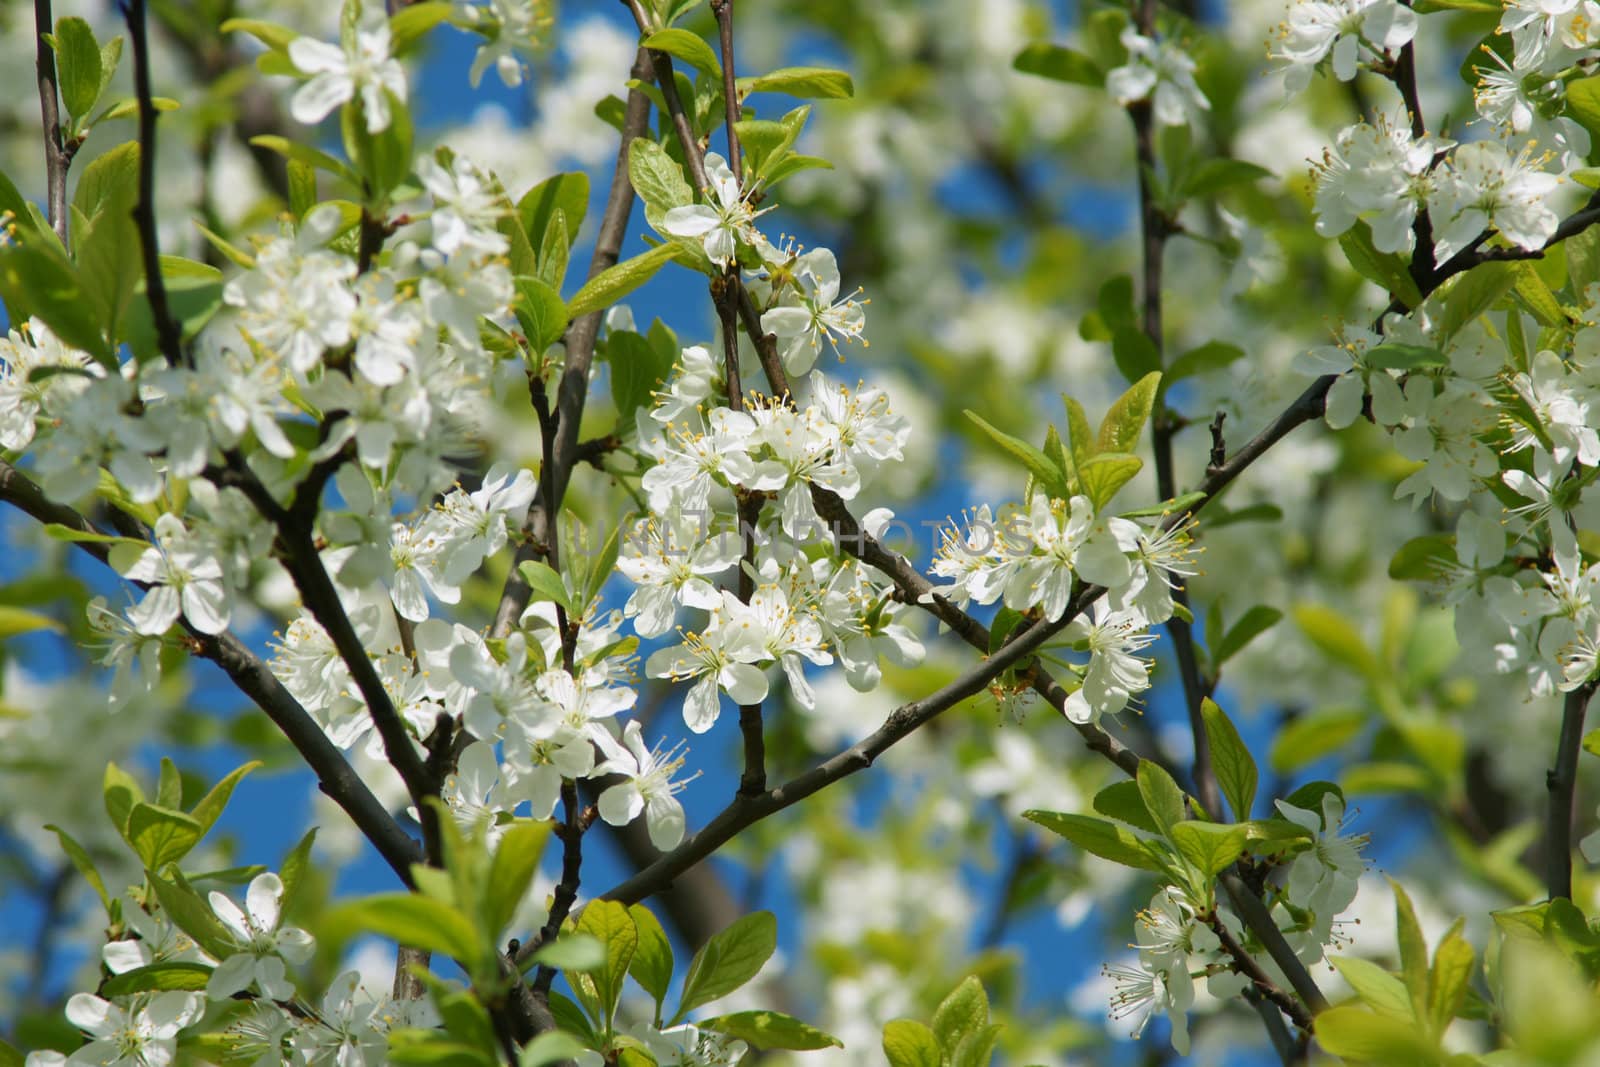 White flower on branch, close-up in spring season